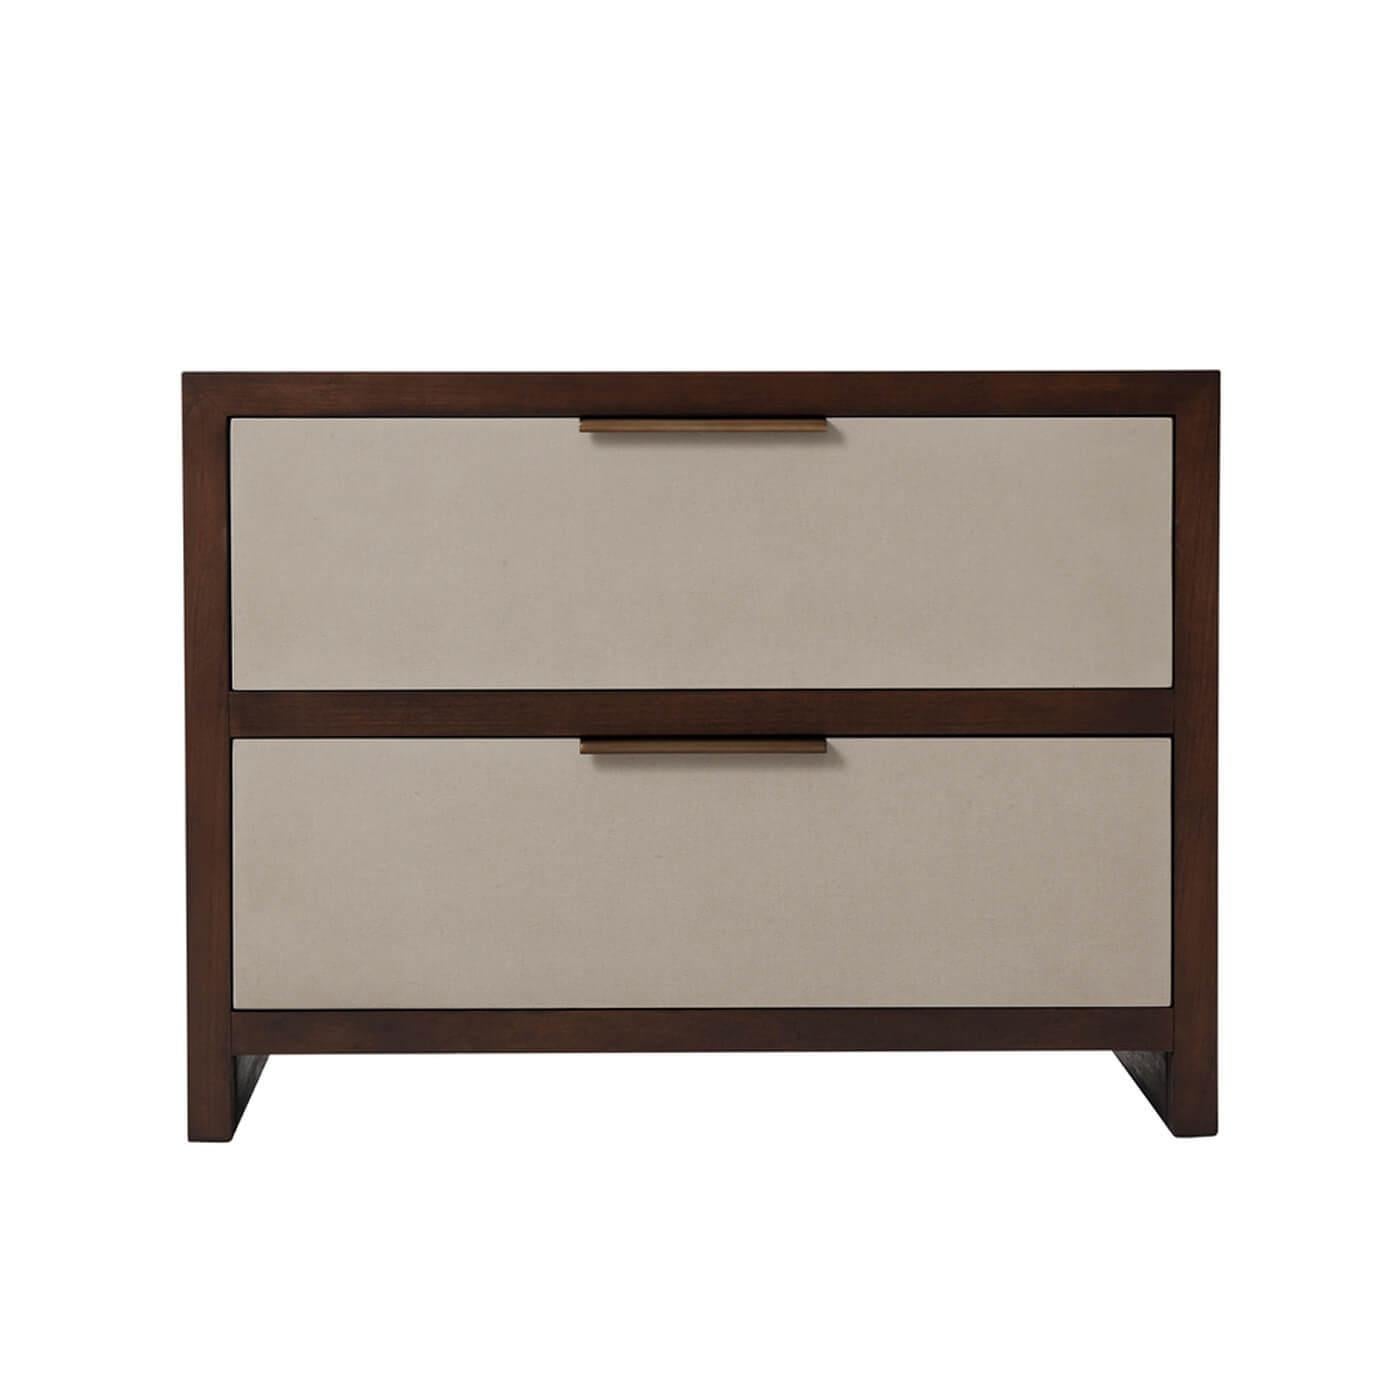 Modern wood and leather two-drawer nightstand in a cherry veneer with almond finish. This nightstand has two singular grey leather-wrapped drawers accented with brushed pyrite finish handles. 

Dimensions: 29.5